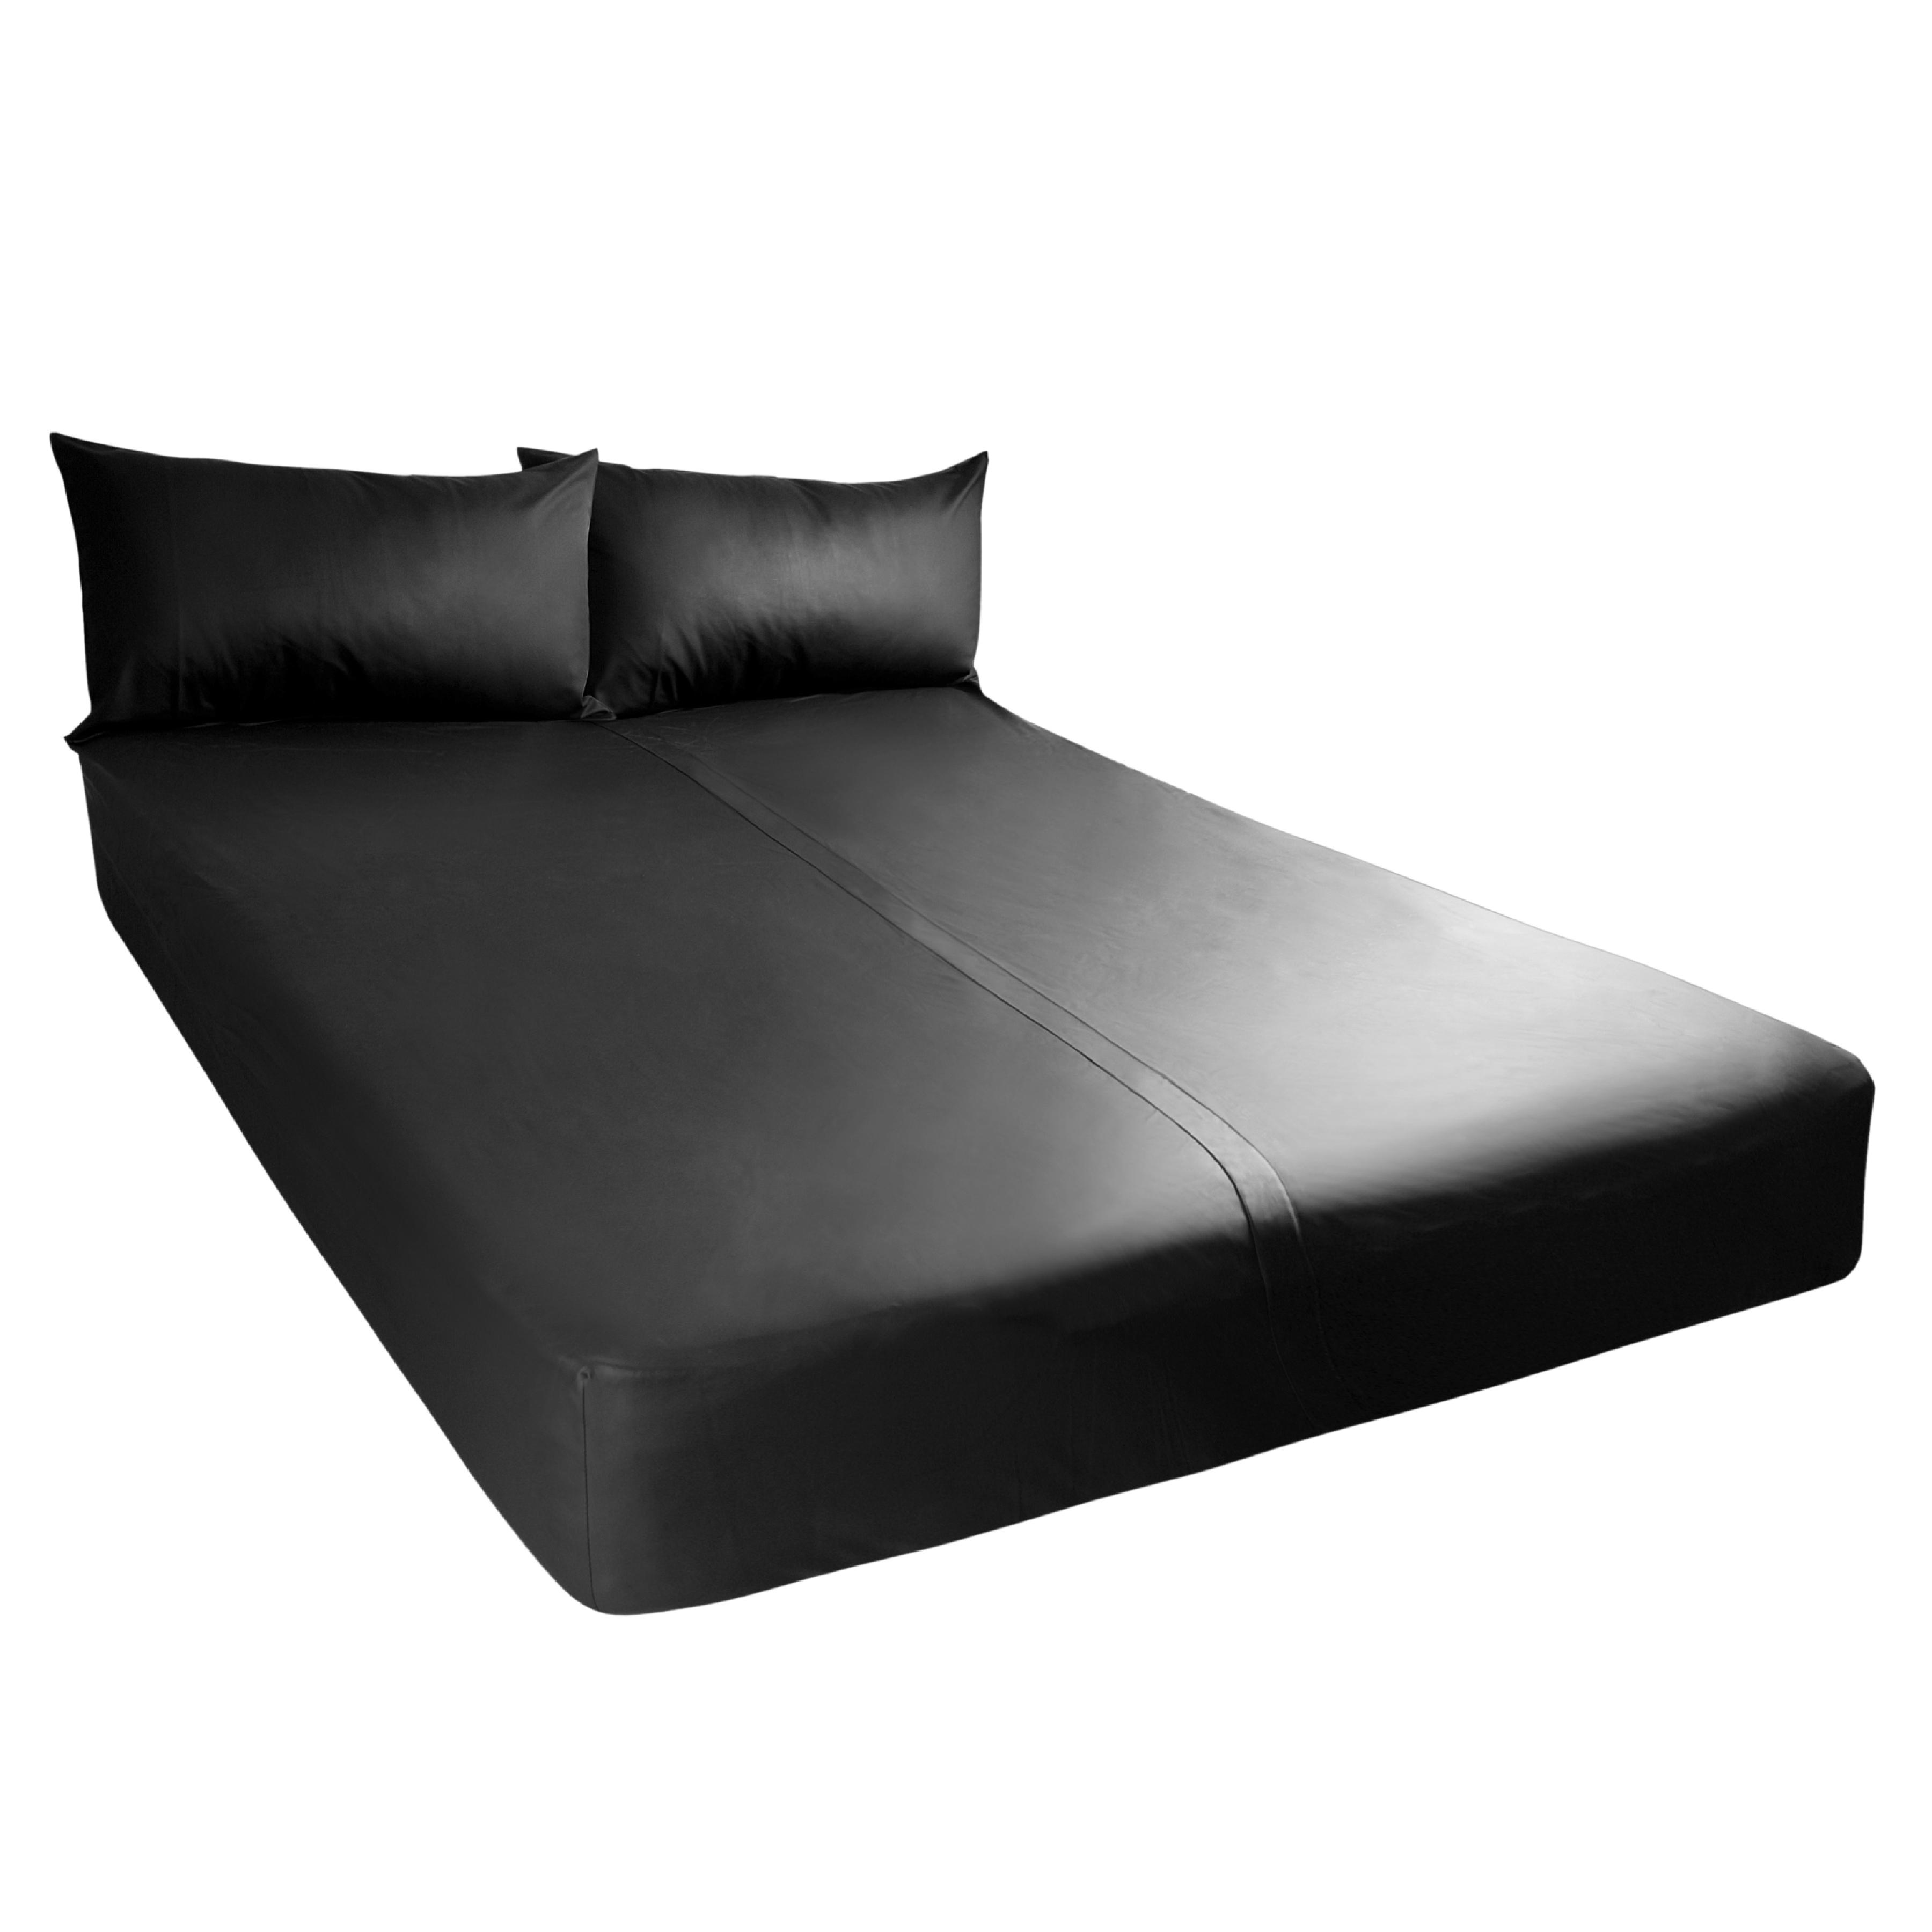 SI IGNITE Exxxtreme Sheets, Waterproof, Queen Size, 153 x 203 cm (60 x 80 in), Black